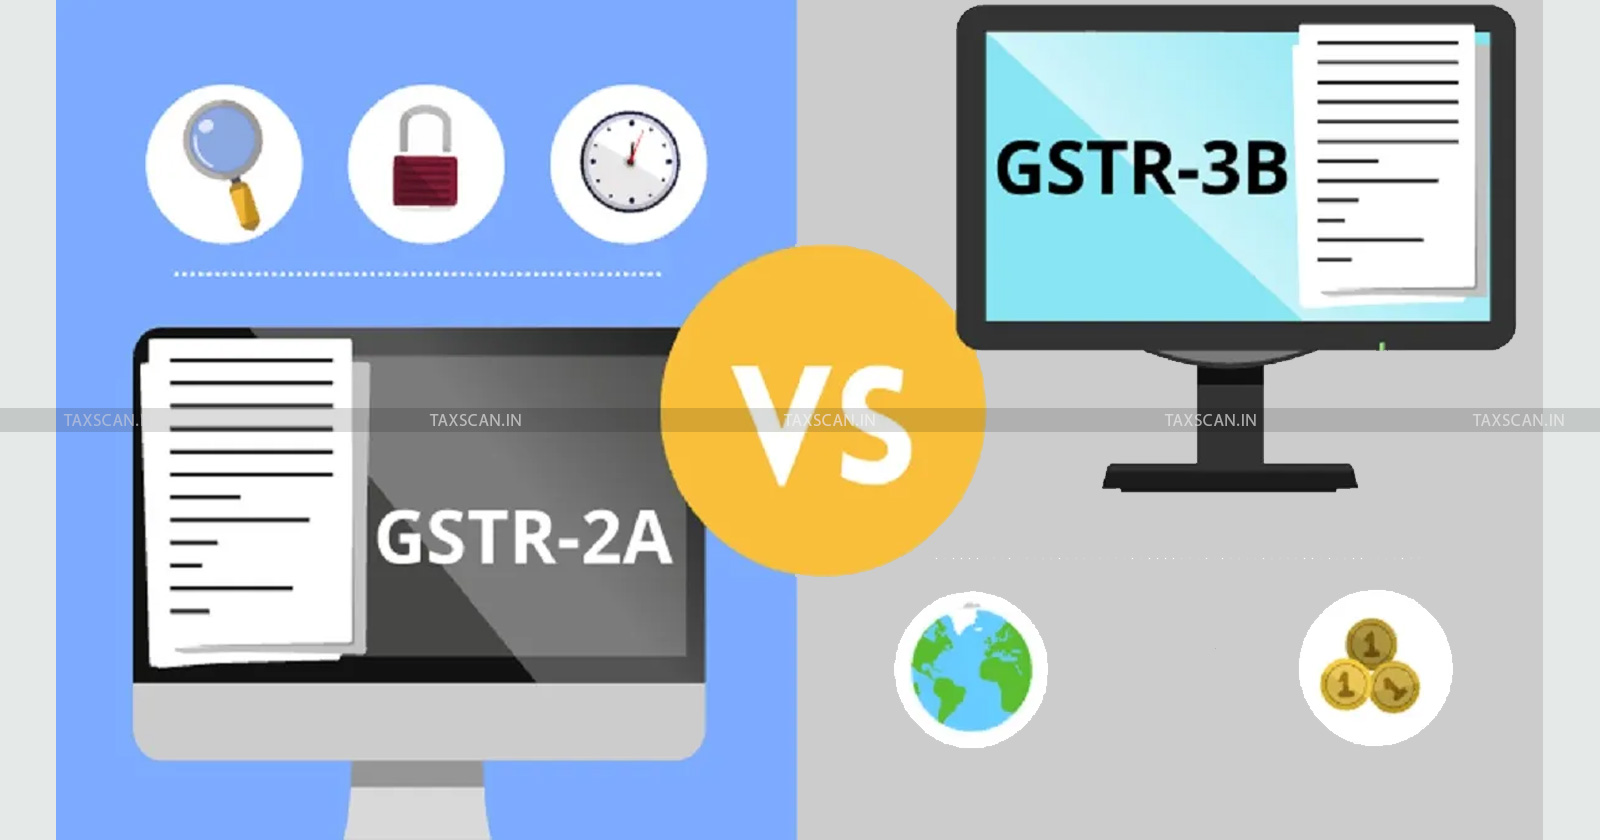 Denial of Legitimate ITC Solely - GSTR 2A-3B -Kerala HC - Assessing Authority - Petitioner’s Contentions - GST -TAXSCAN